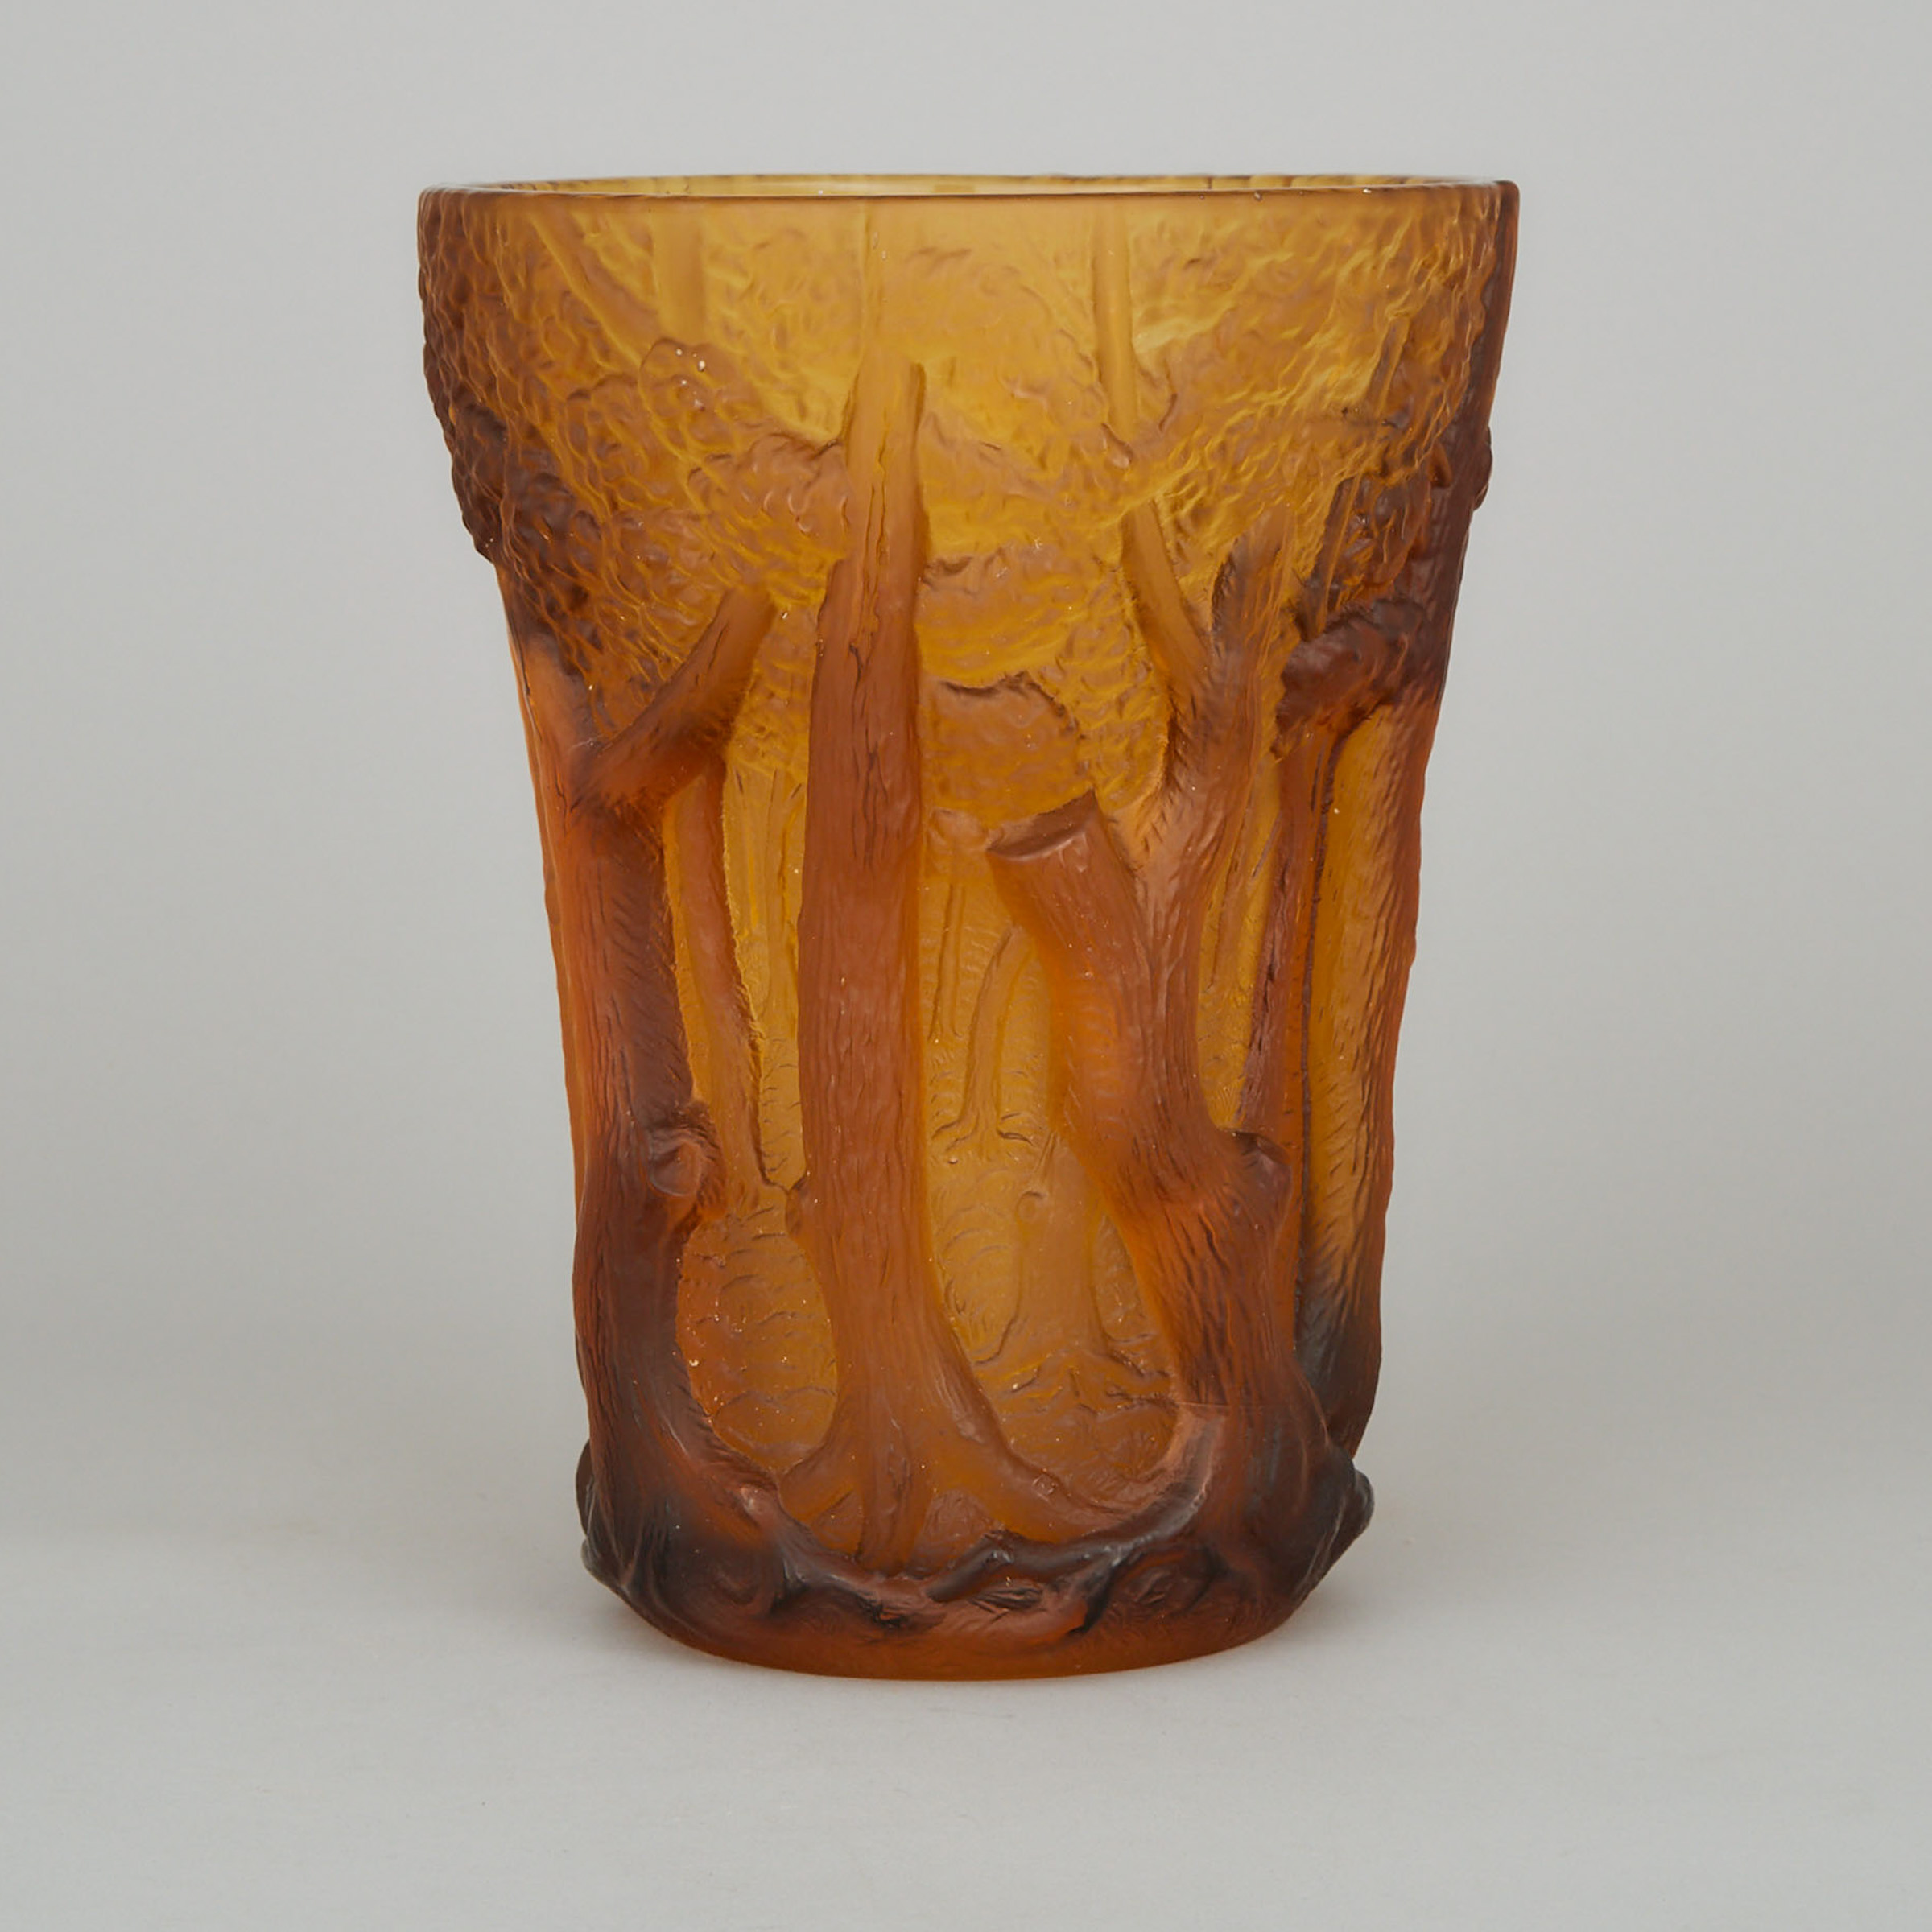 Moulded and Frosted Amber Glass Vase, probably Barolac, early 20th century